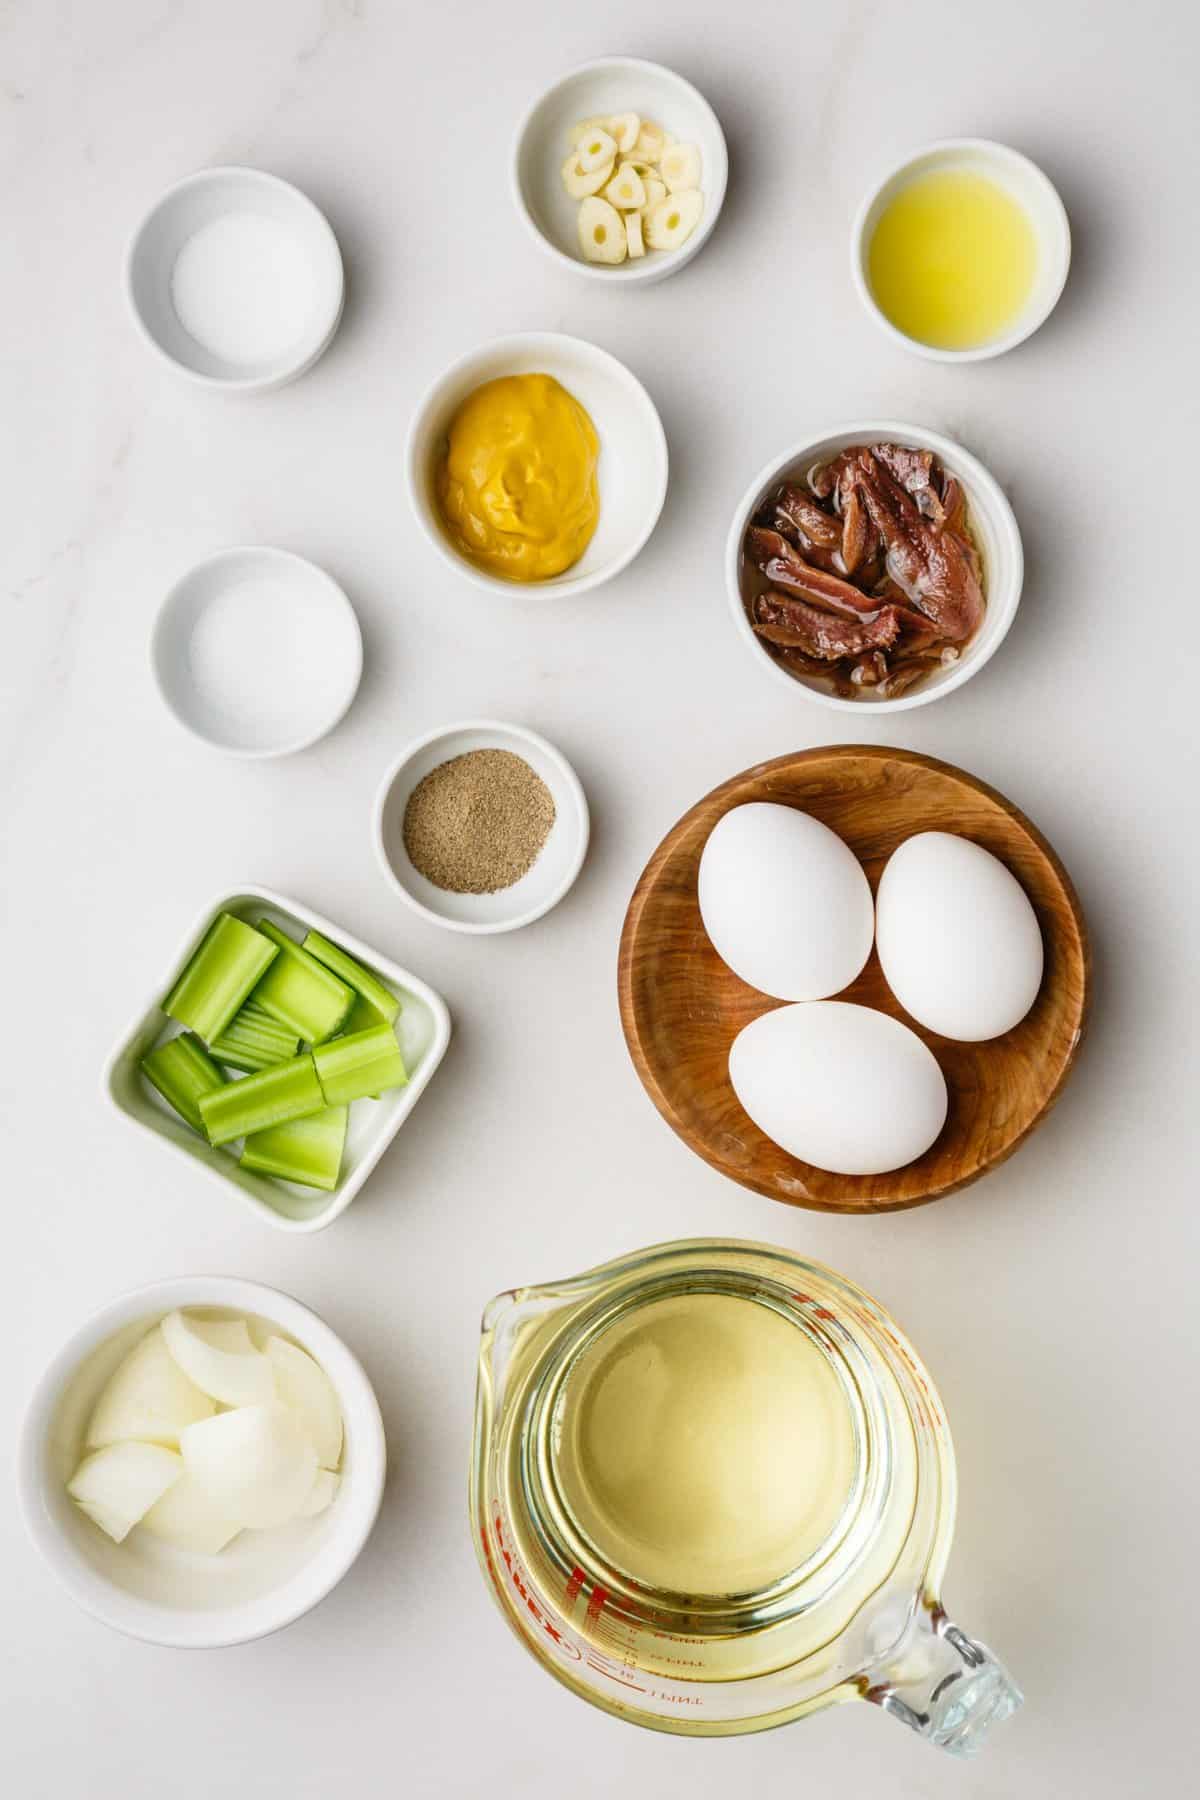 ingredients to make caesar dressing from scratch